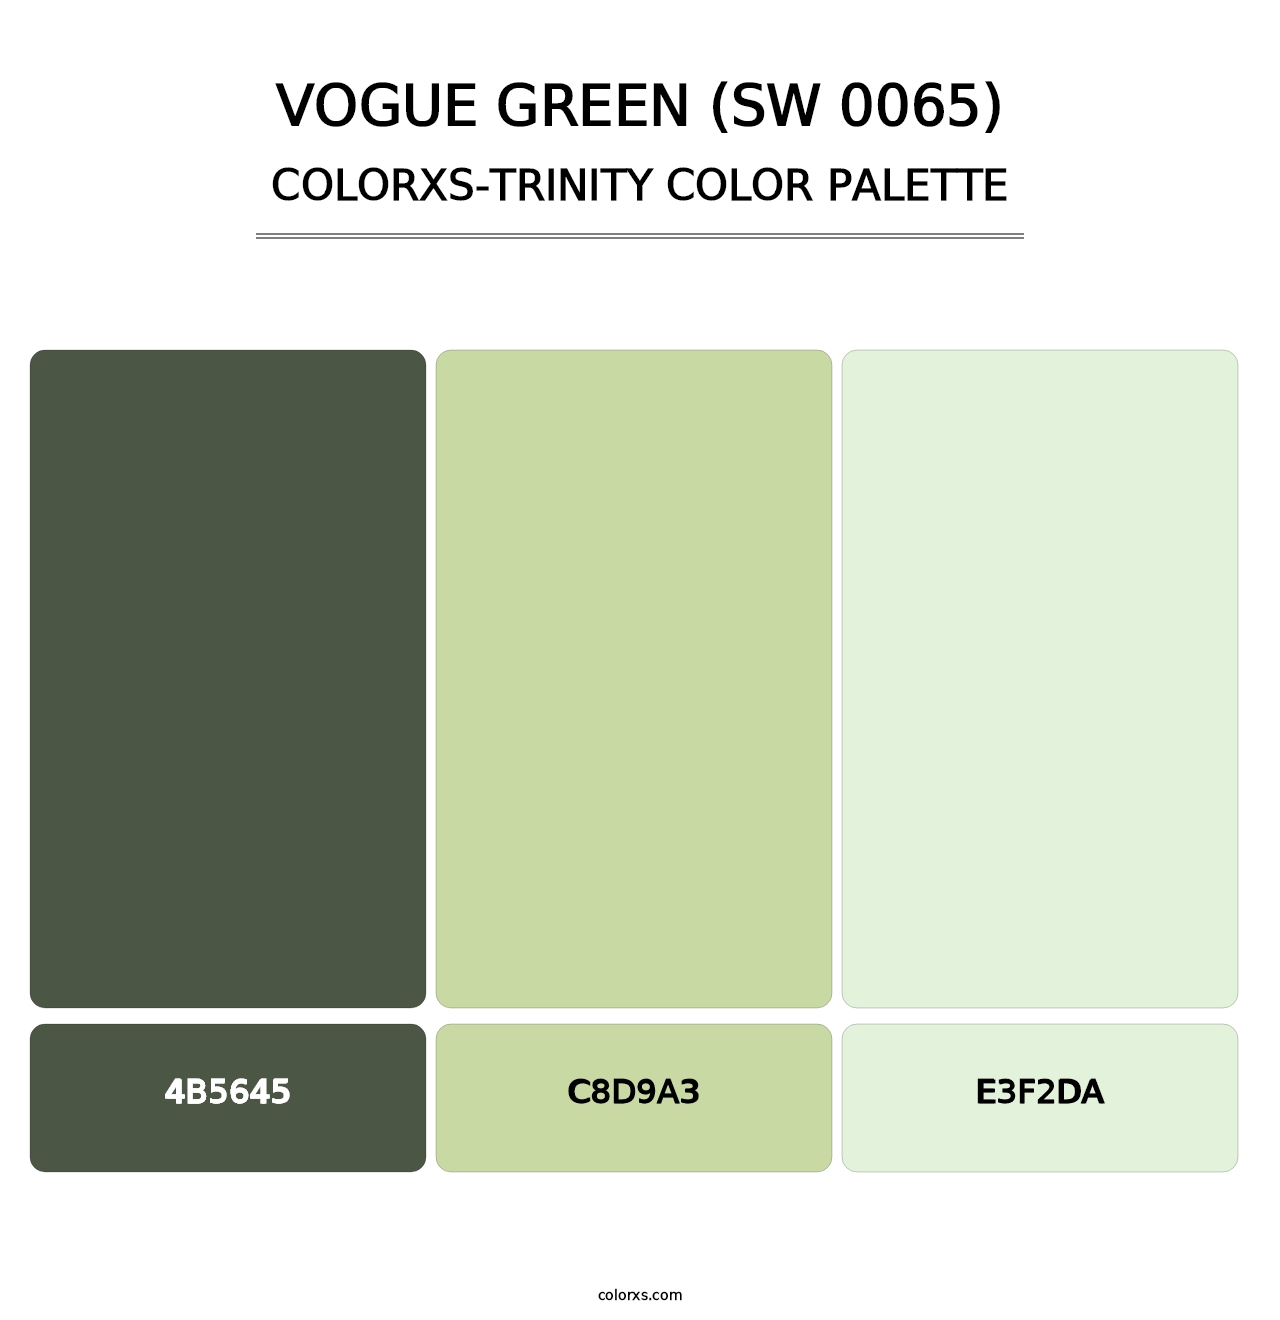 Vogue Green (SW 0065) - Colorxs Trinity Palette